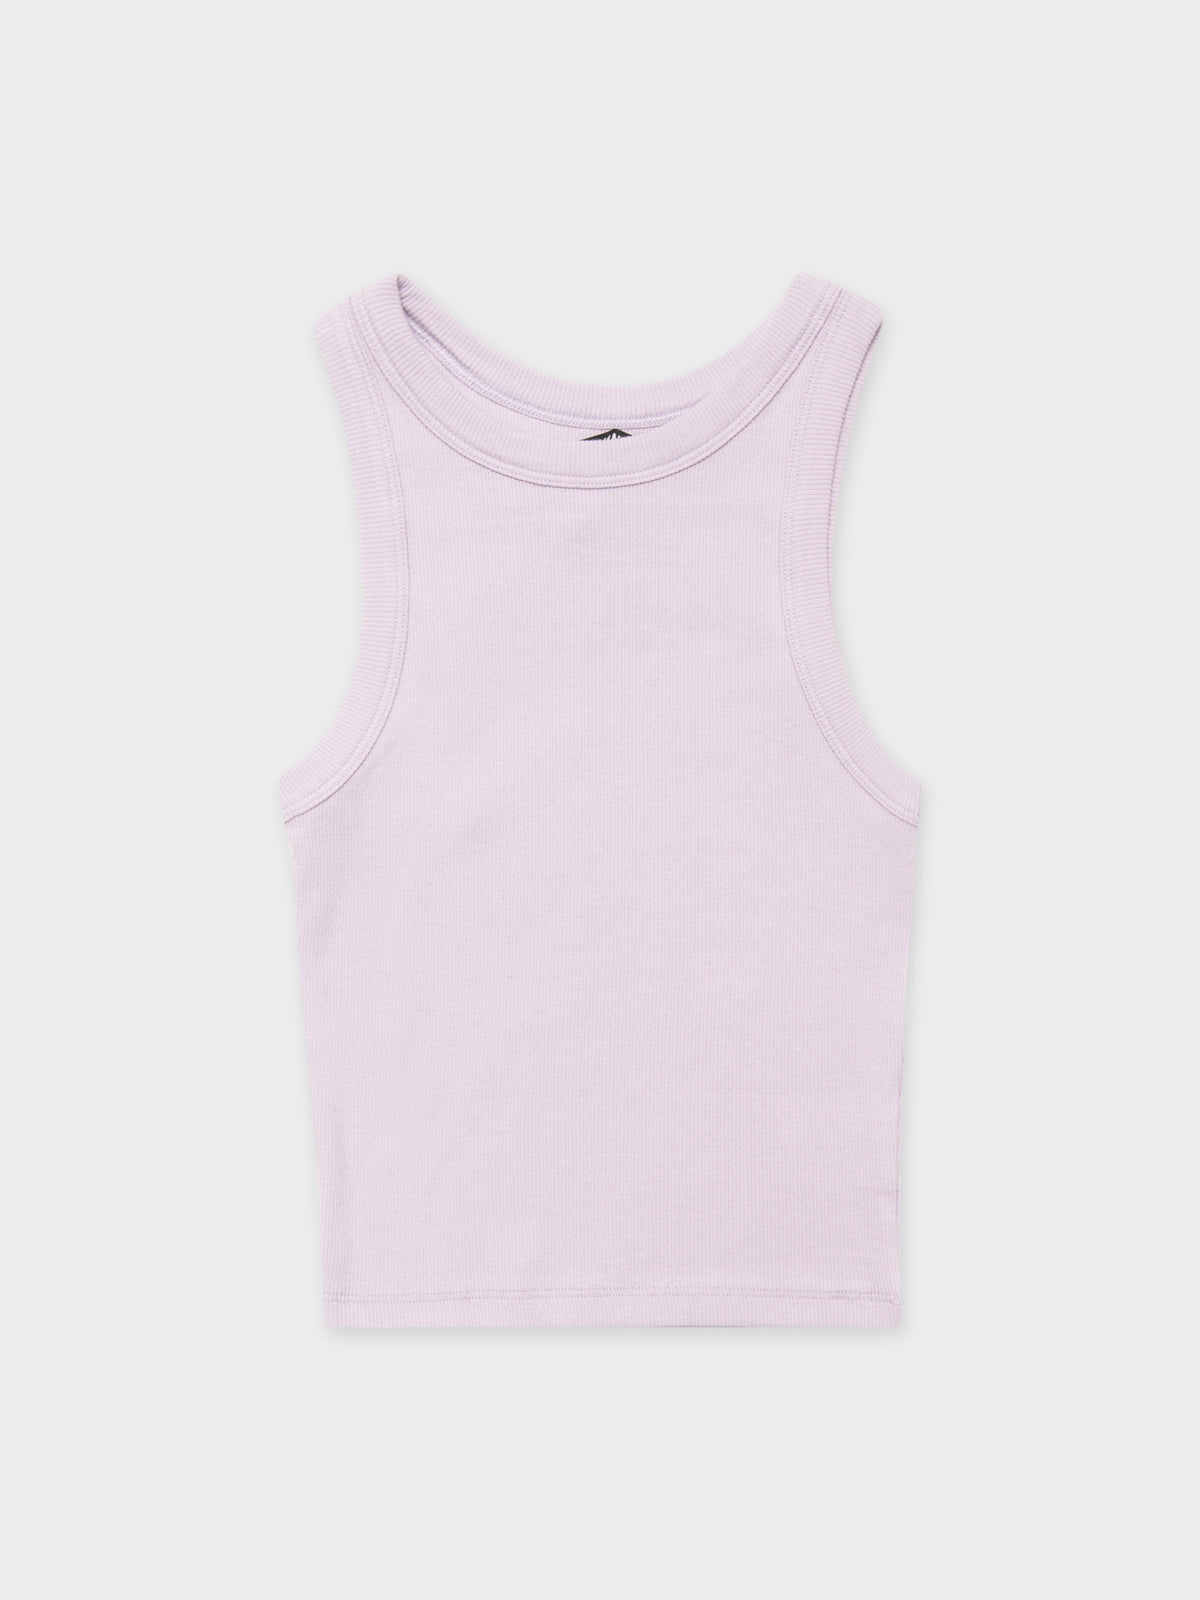 Daisy Tank Top in Lilac